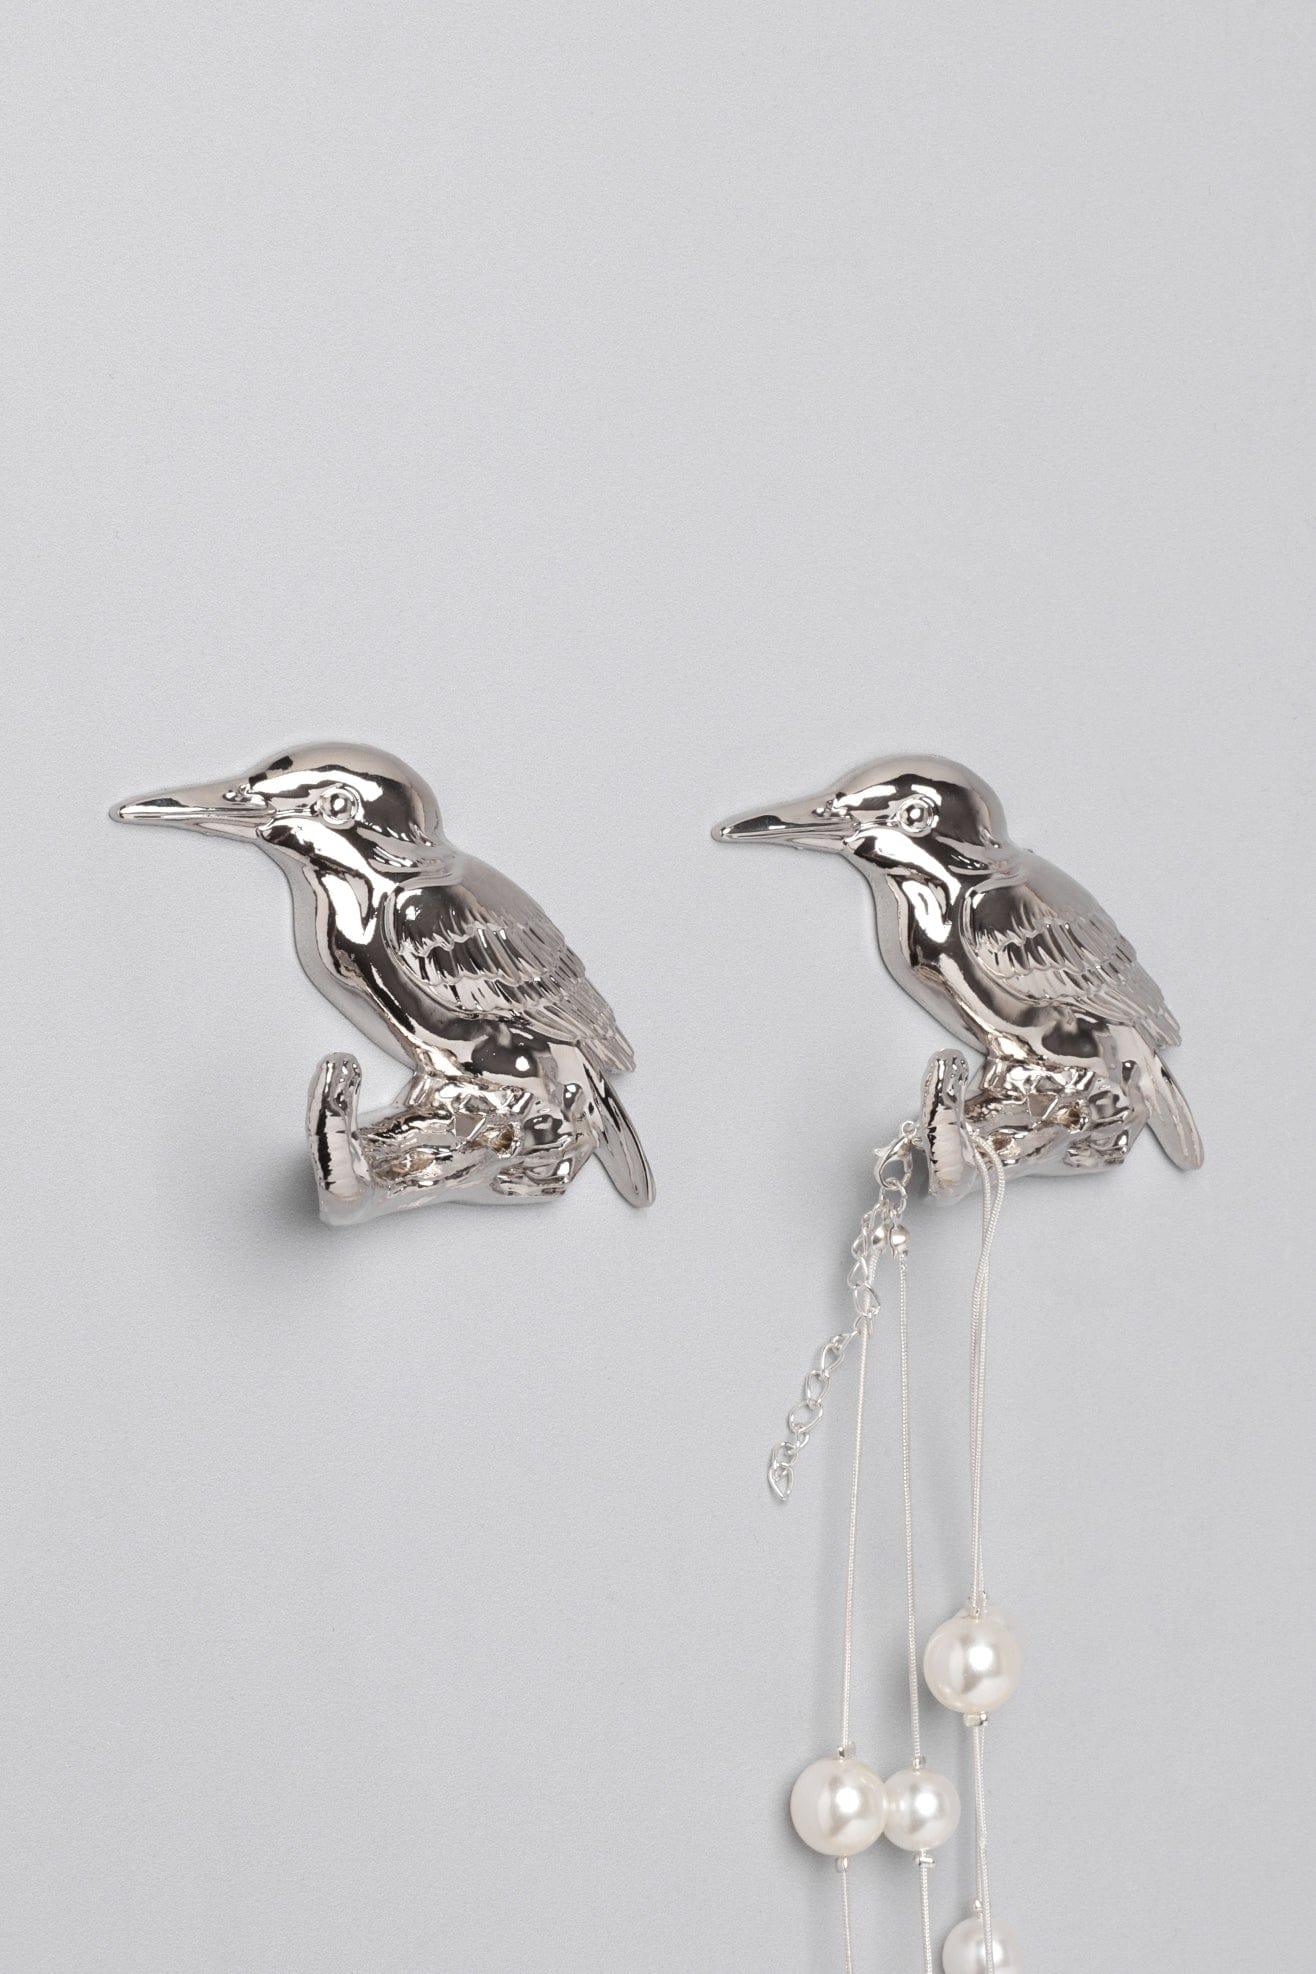 Gdecorstore All Hooks Silver Set Of Two Silver Solid Brass Chrome Birds Wall Coat Organizer Coat Hooks